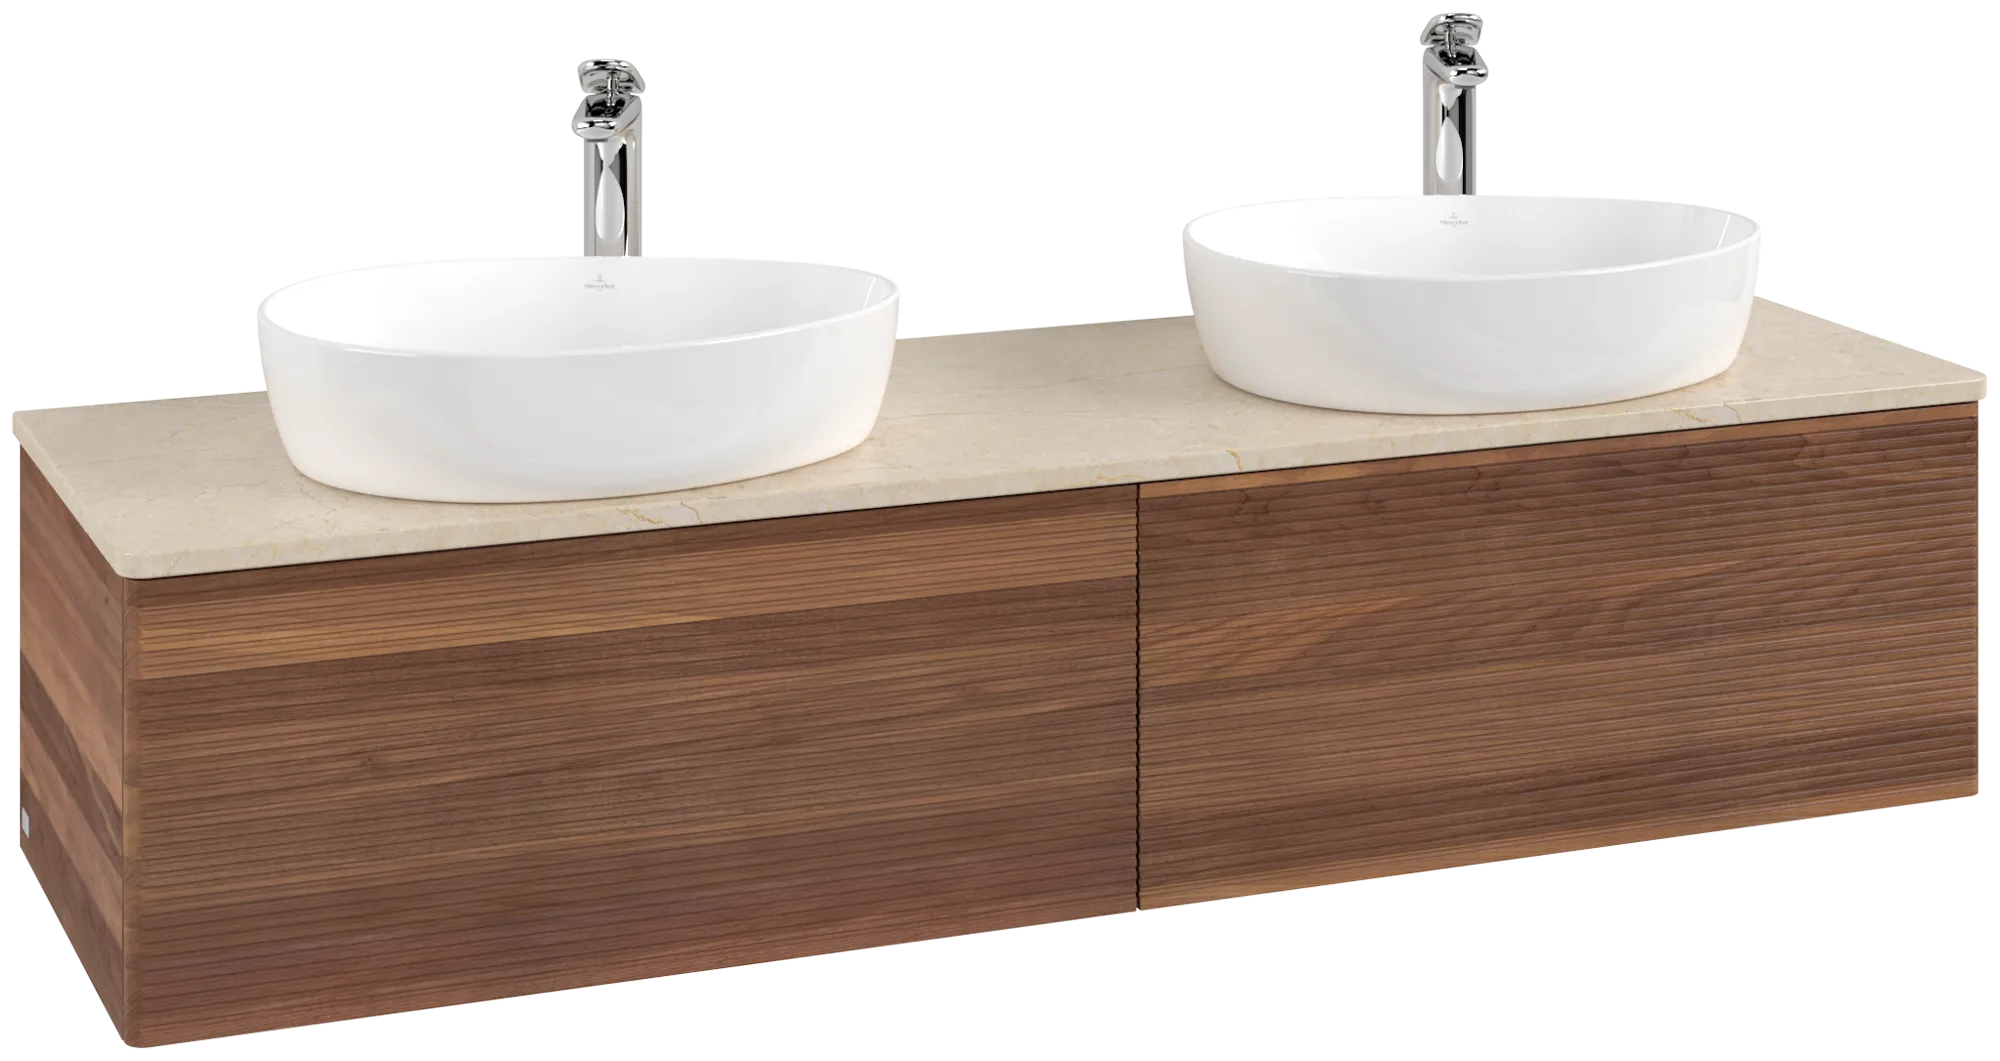 Obrázek VILLEROY BOCH Antao Vanity unit, 2 pull-out compartments, 1600 x 360 x 500 mm, Front with grain texture, Warm Walnut / Botticino #K39153HM